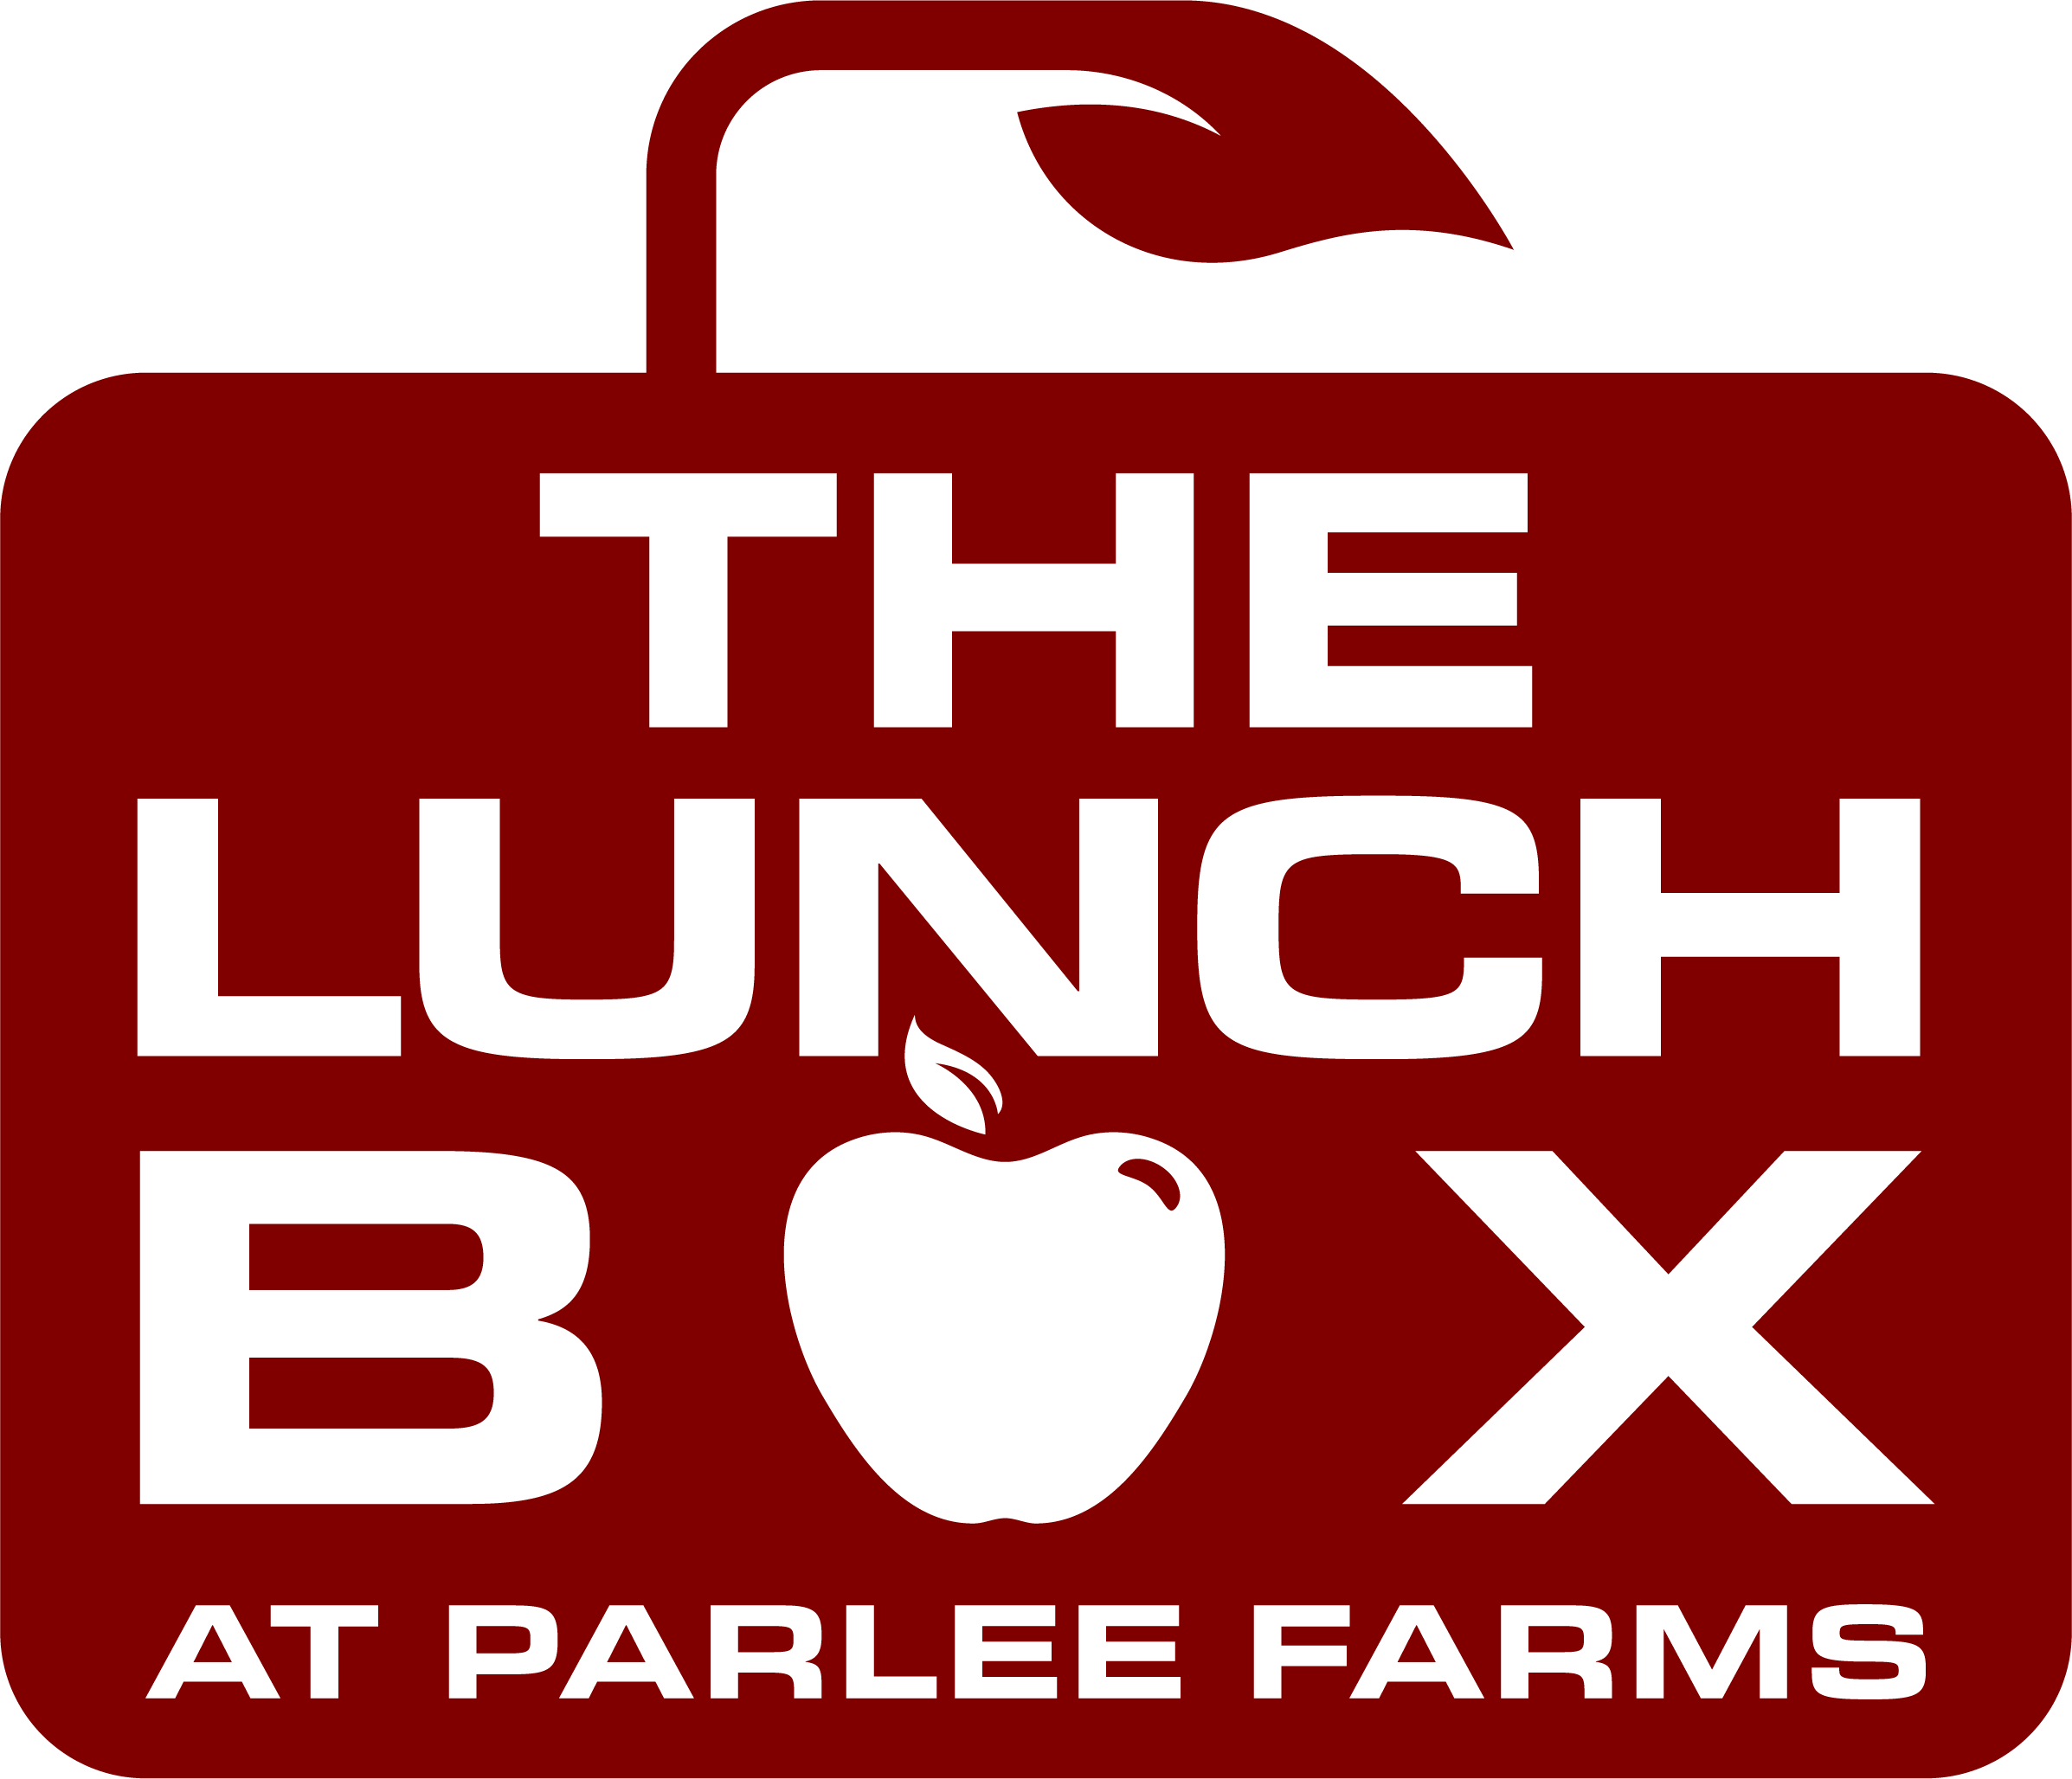 The Lunch Box at Parlee Farms